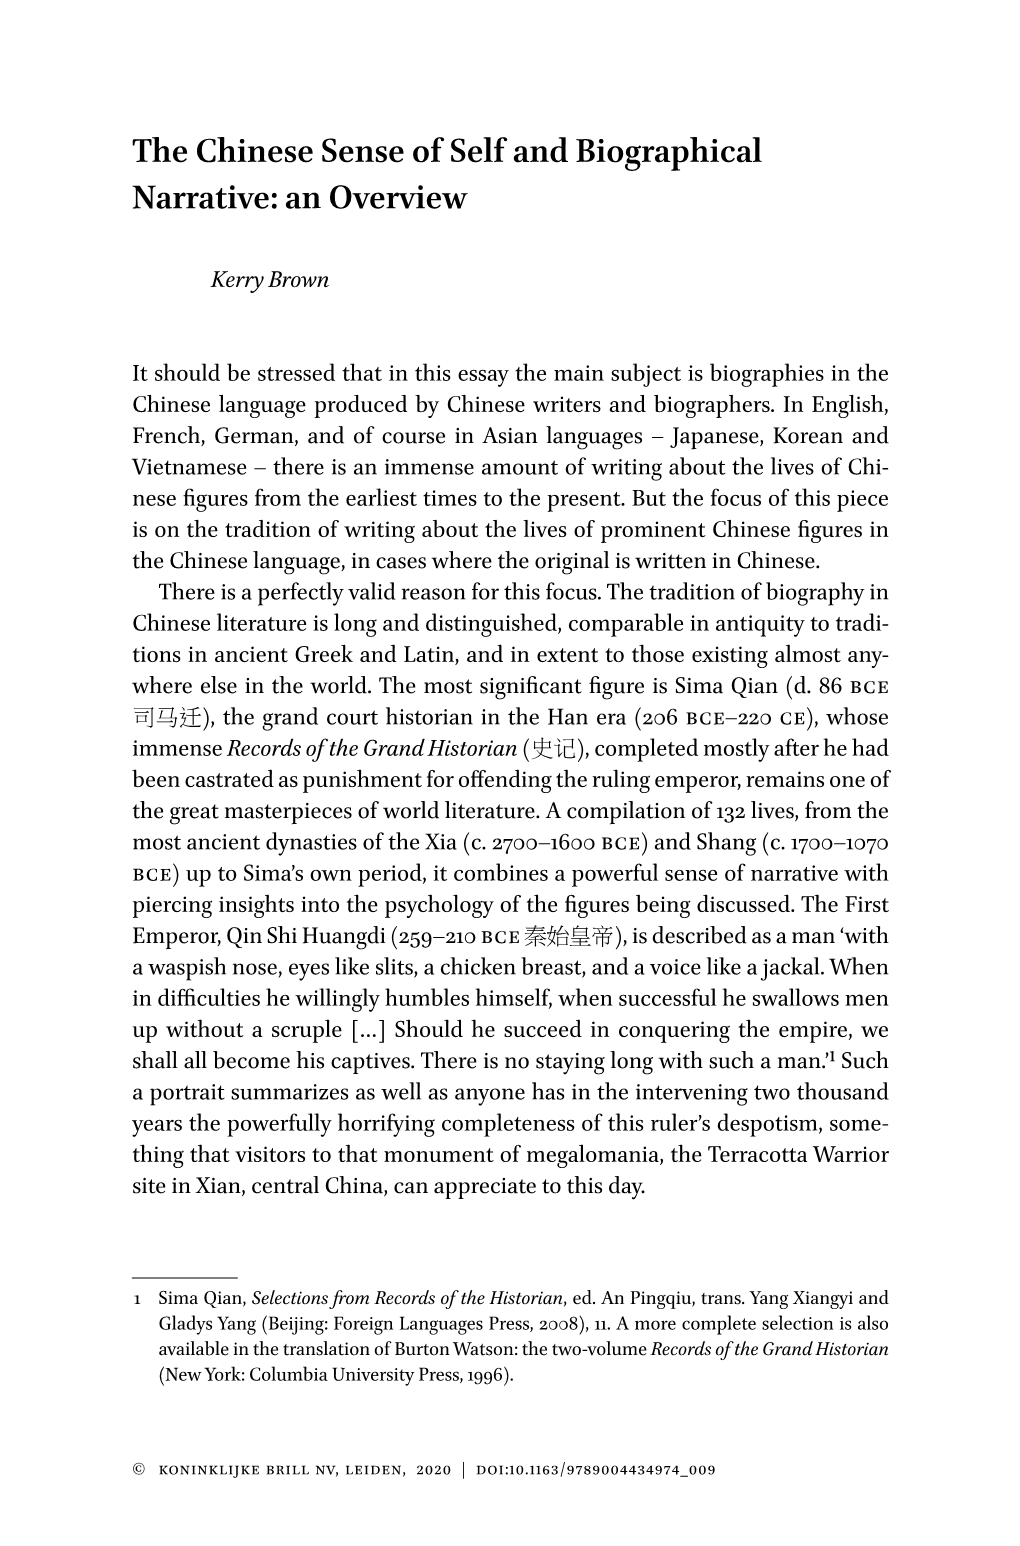 The Chinese Sense of Self and Biographical Narrative: an Overview